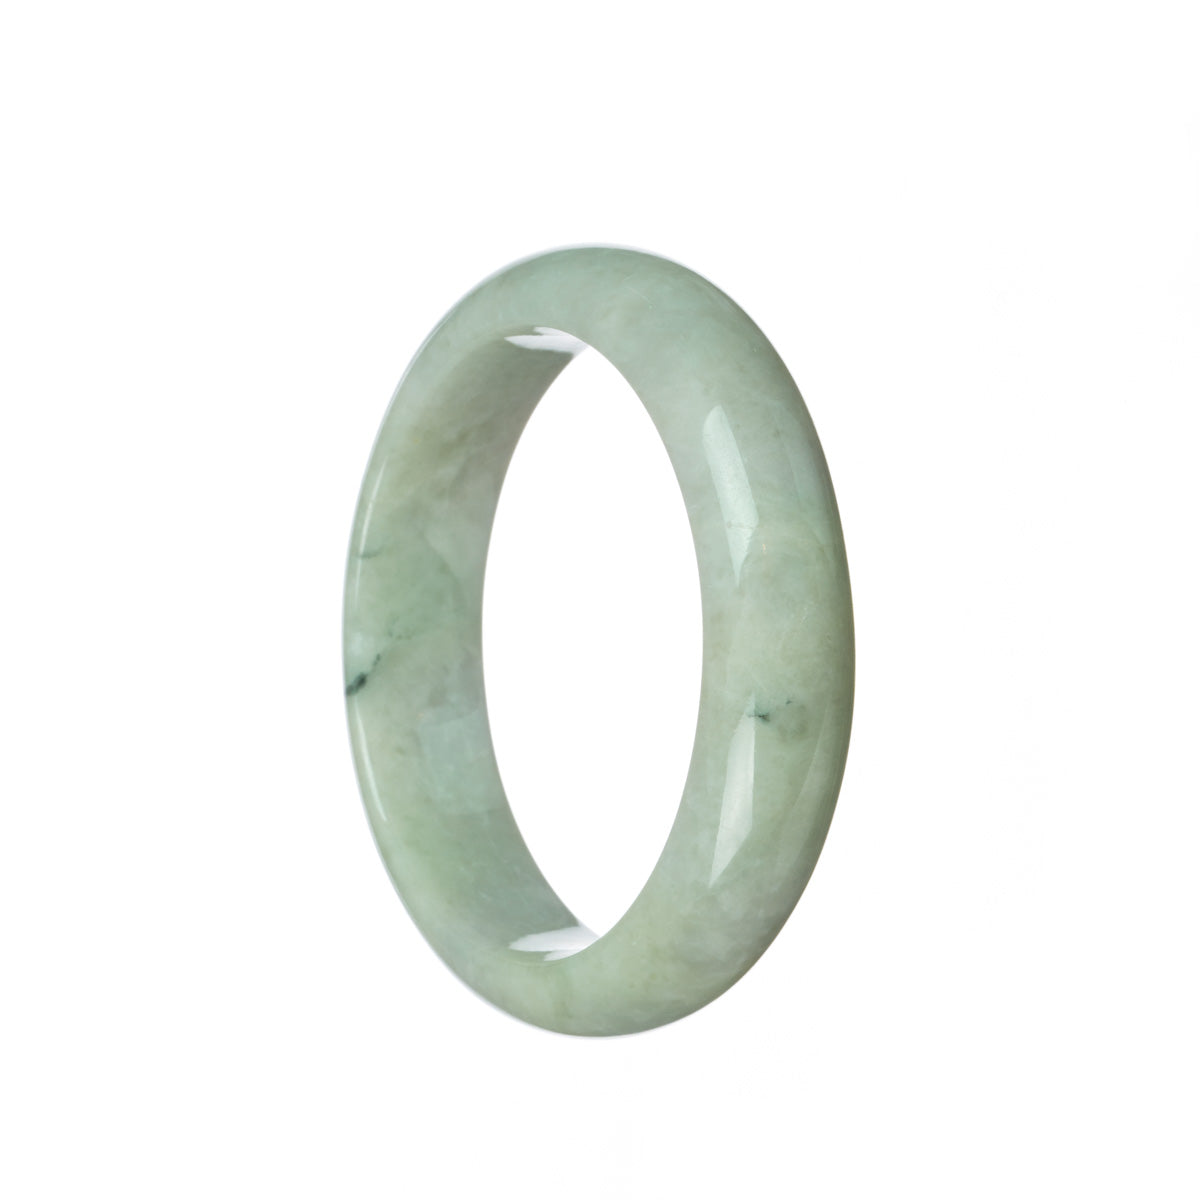 A close-up photo of an untreated pale green jade bracelet with a half-moon shape, measuring 59mm. It is a beautiful and authentic piece of jewelry from MAYS GEMS.